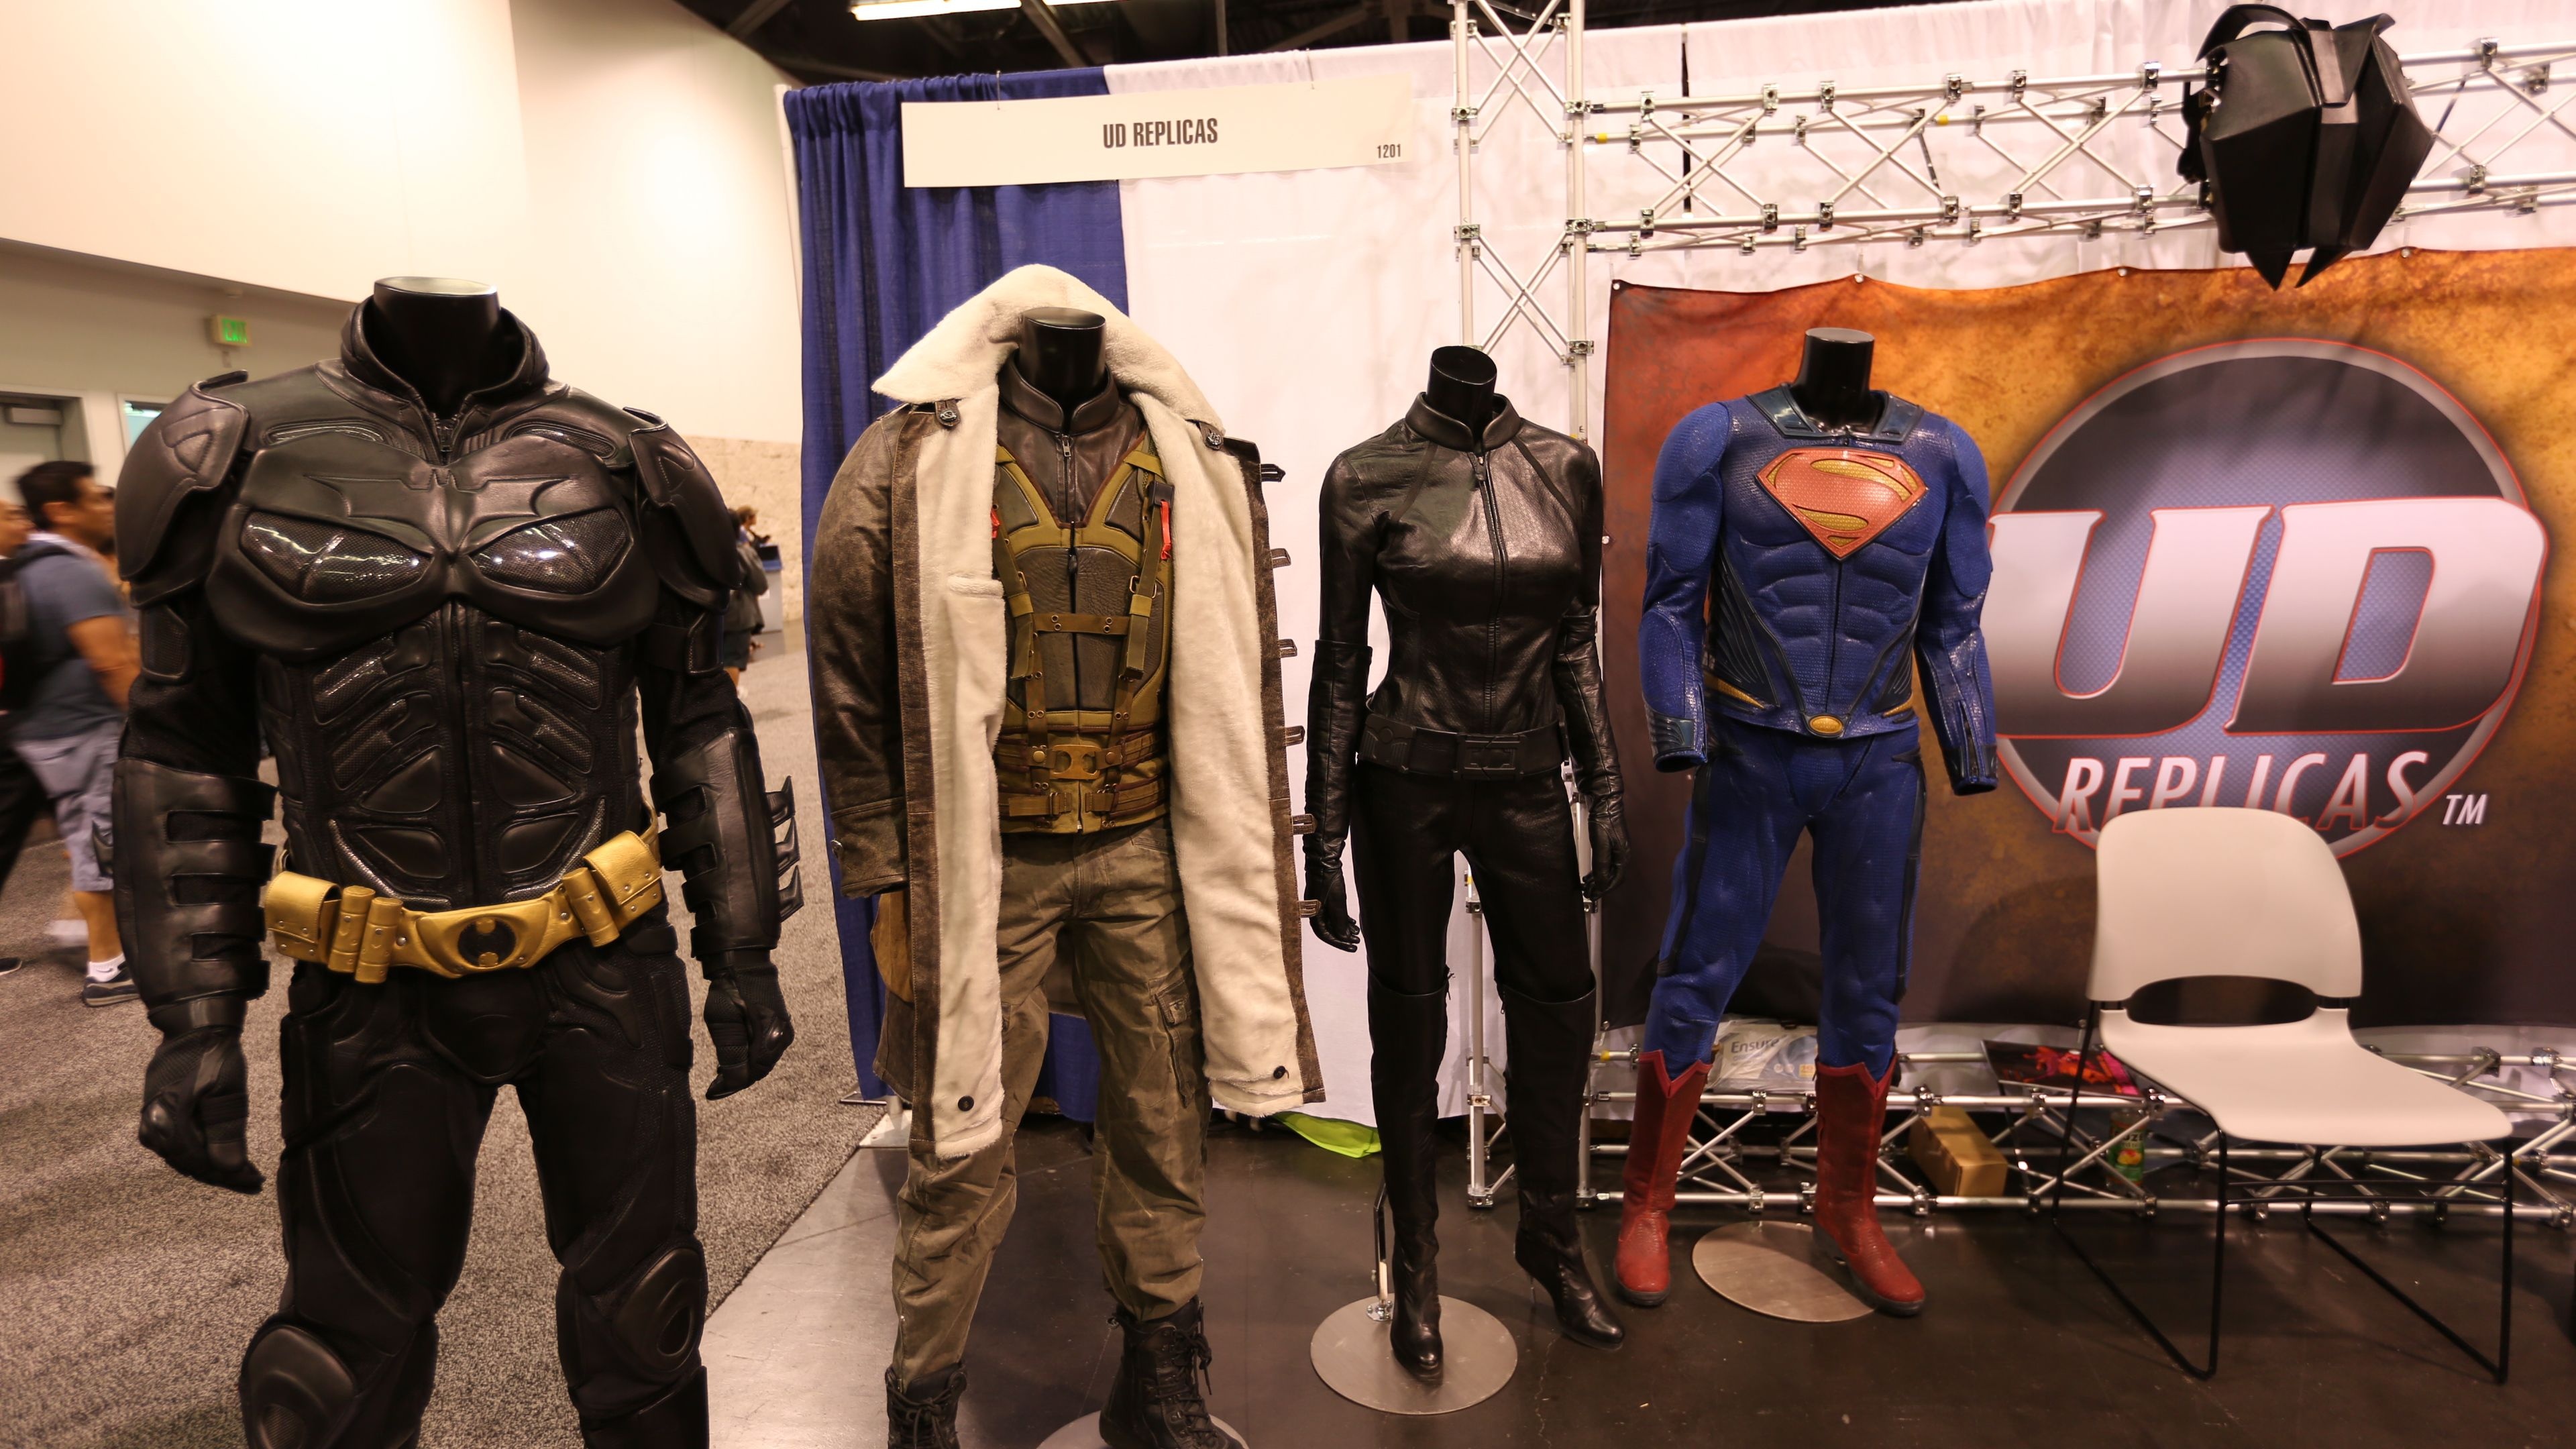 WonderCon 2015, Inside and outside pictures, Convention experience, Cosplay showcase, 3840x2160 4K Desktop